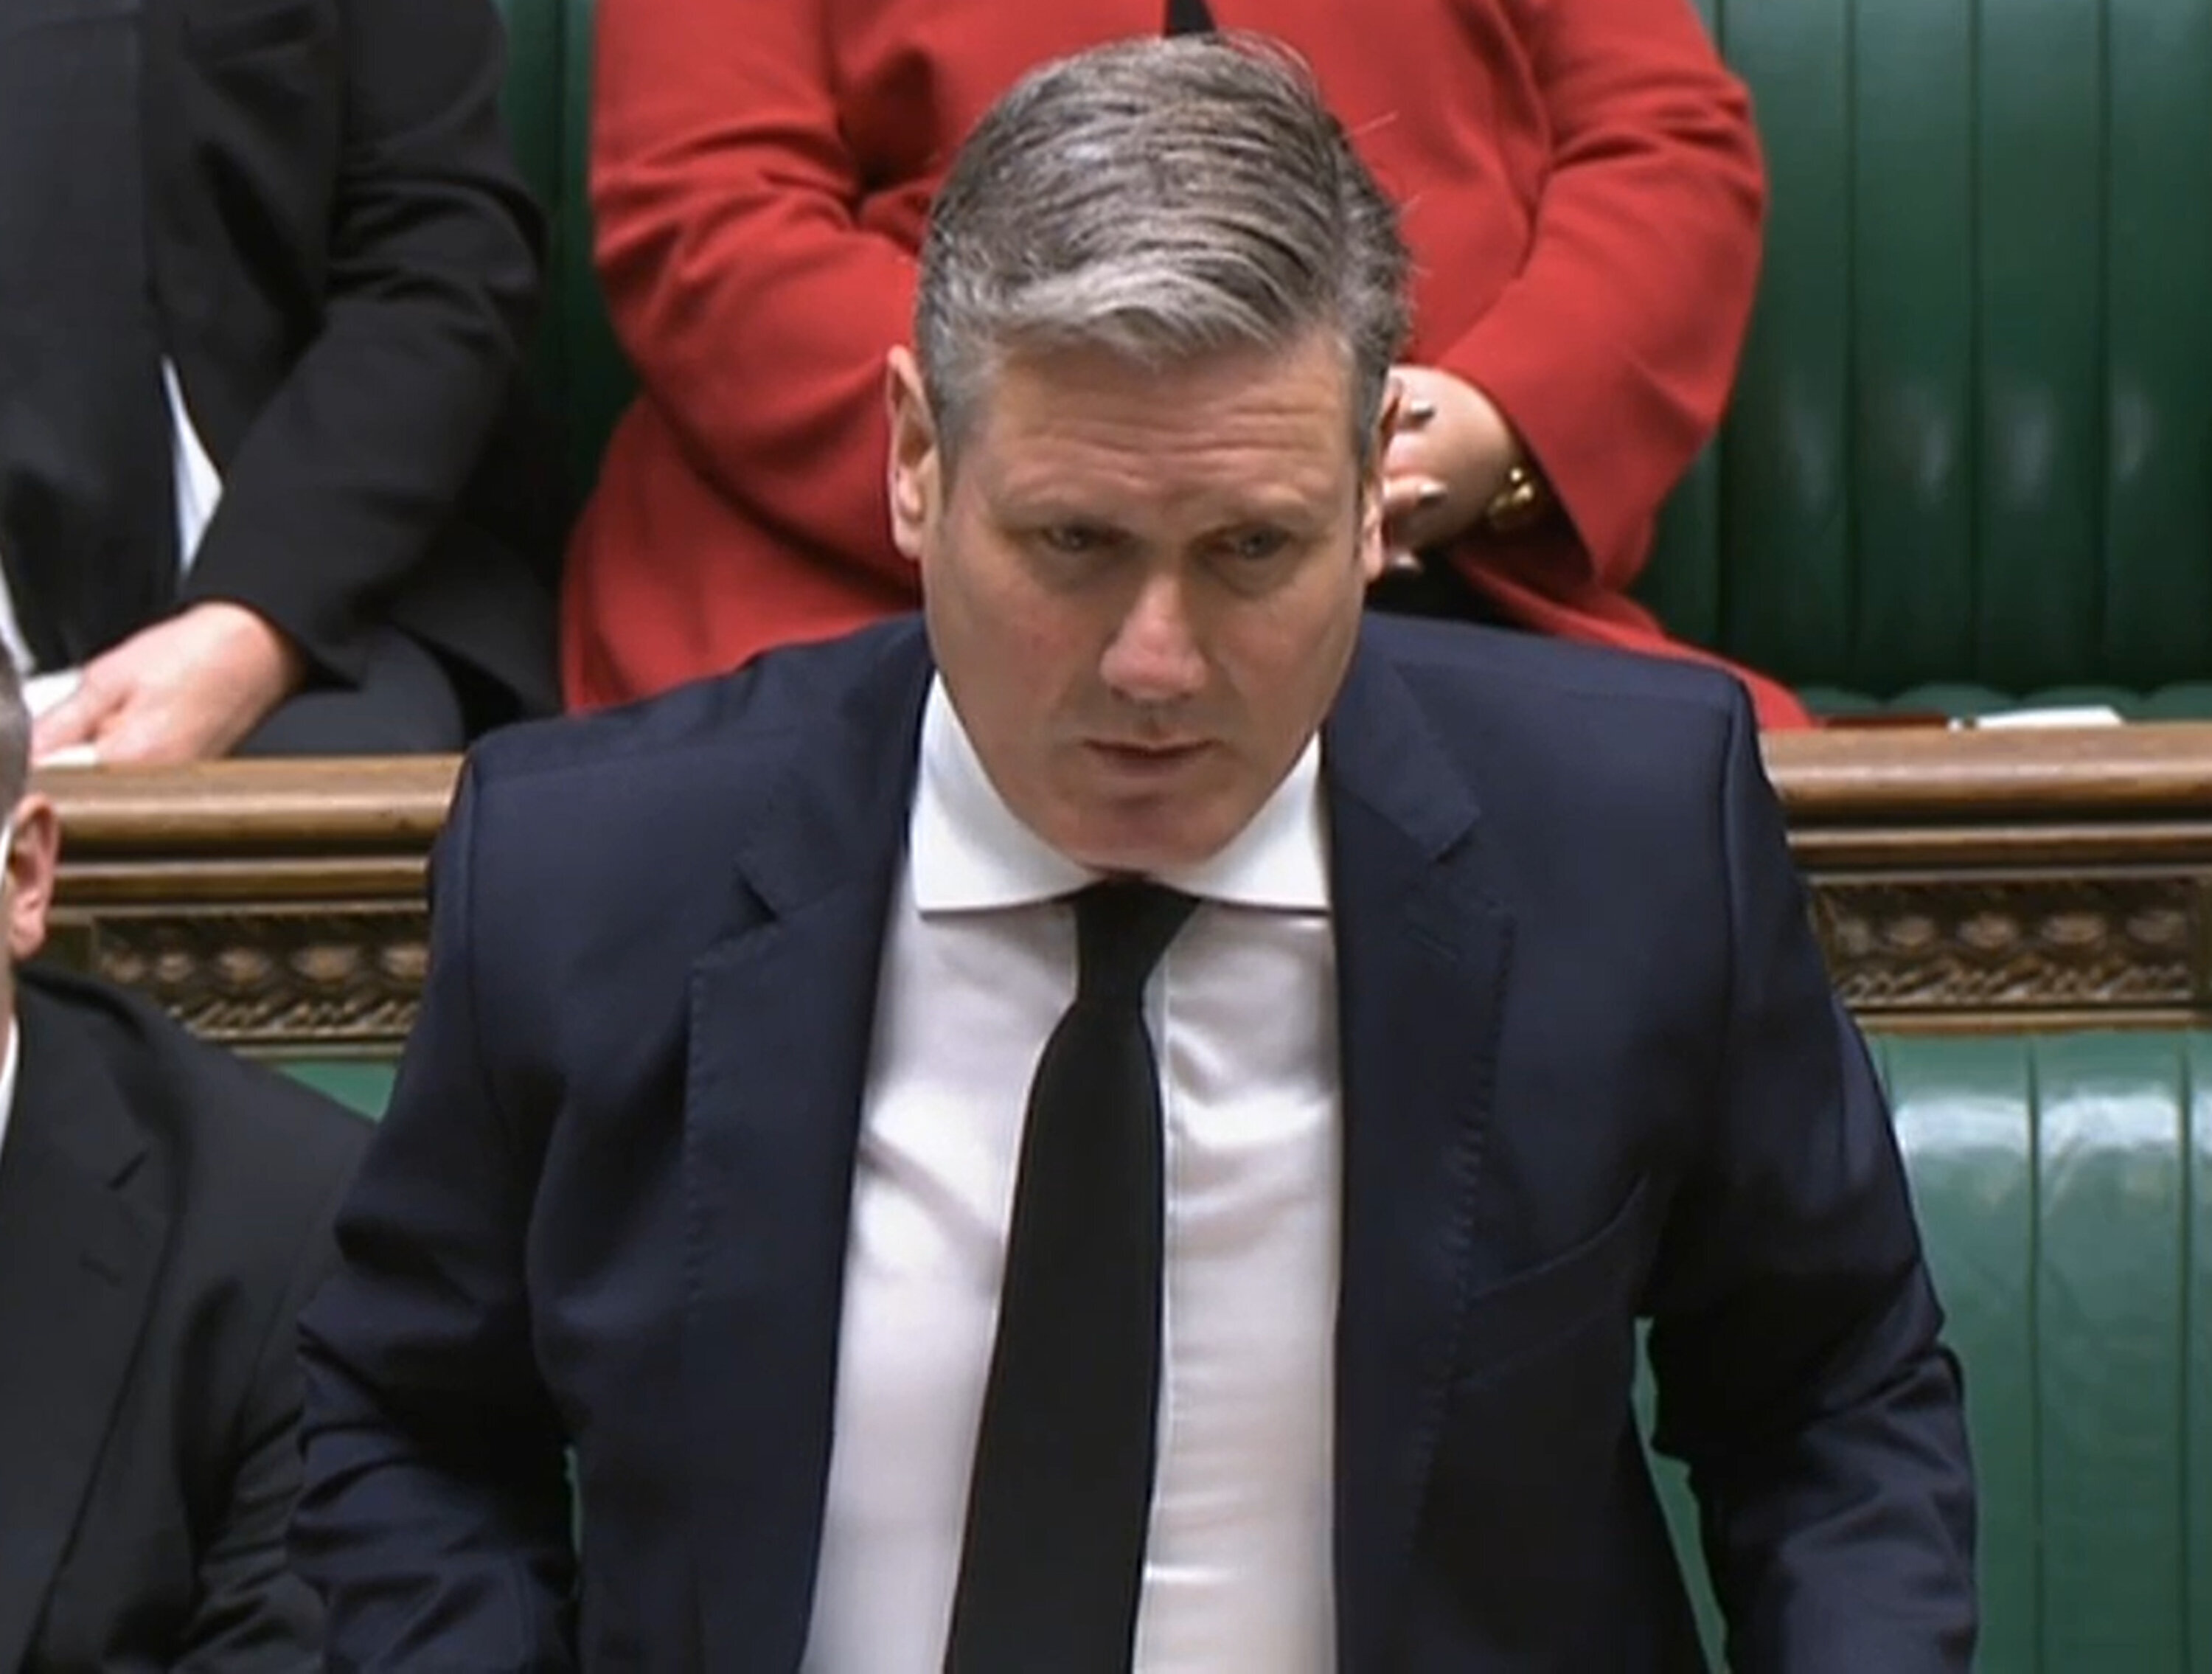 Keir Starmer Tells Boris Johnson To Stop Political Knockabout Over Online Abuse